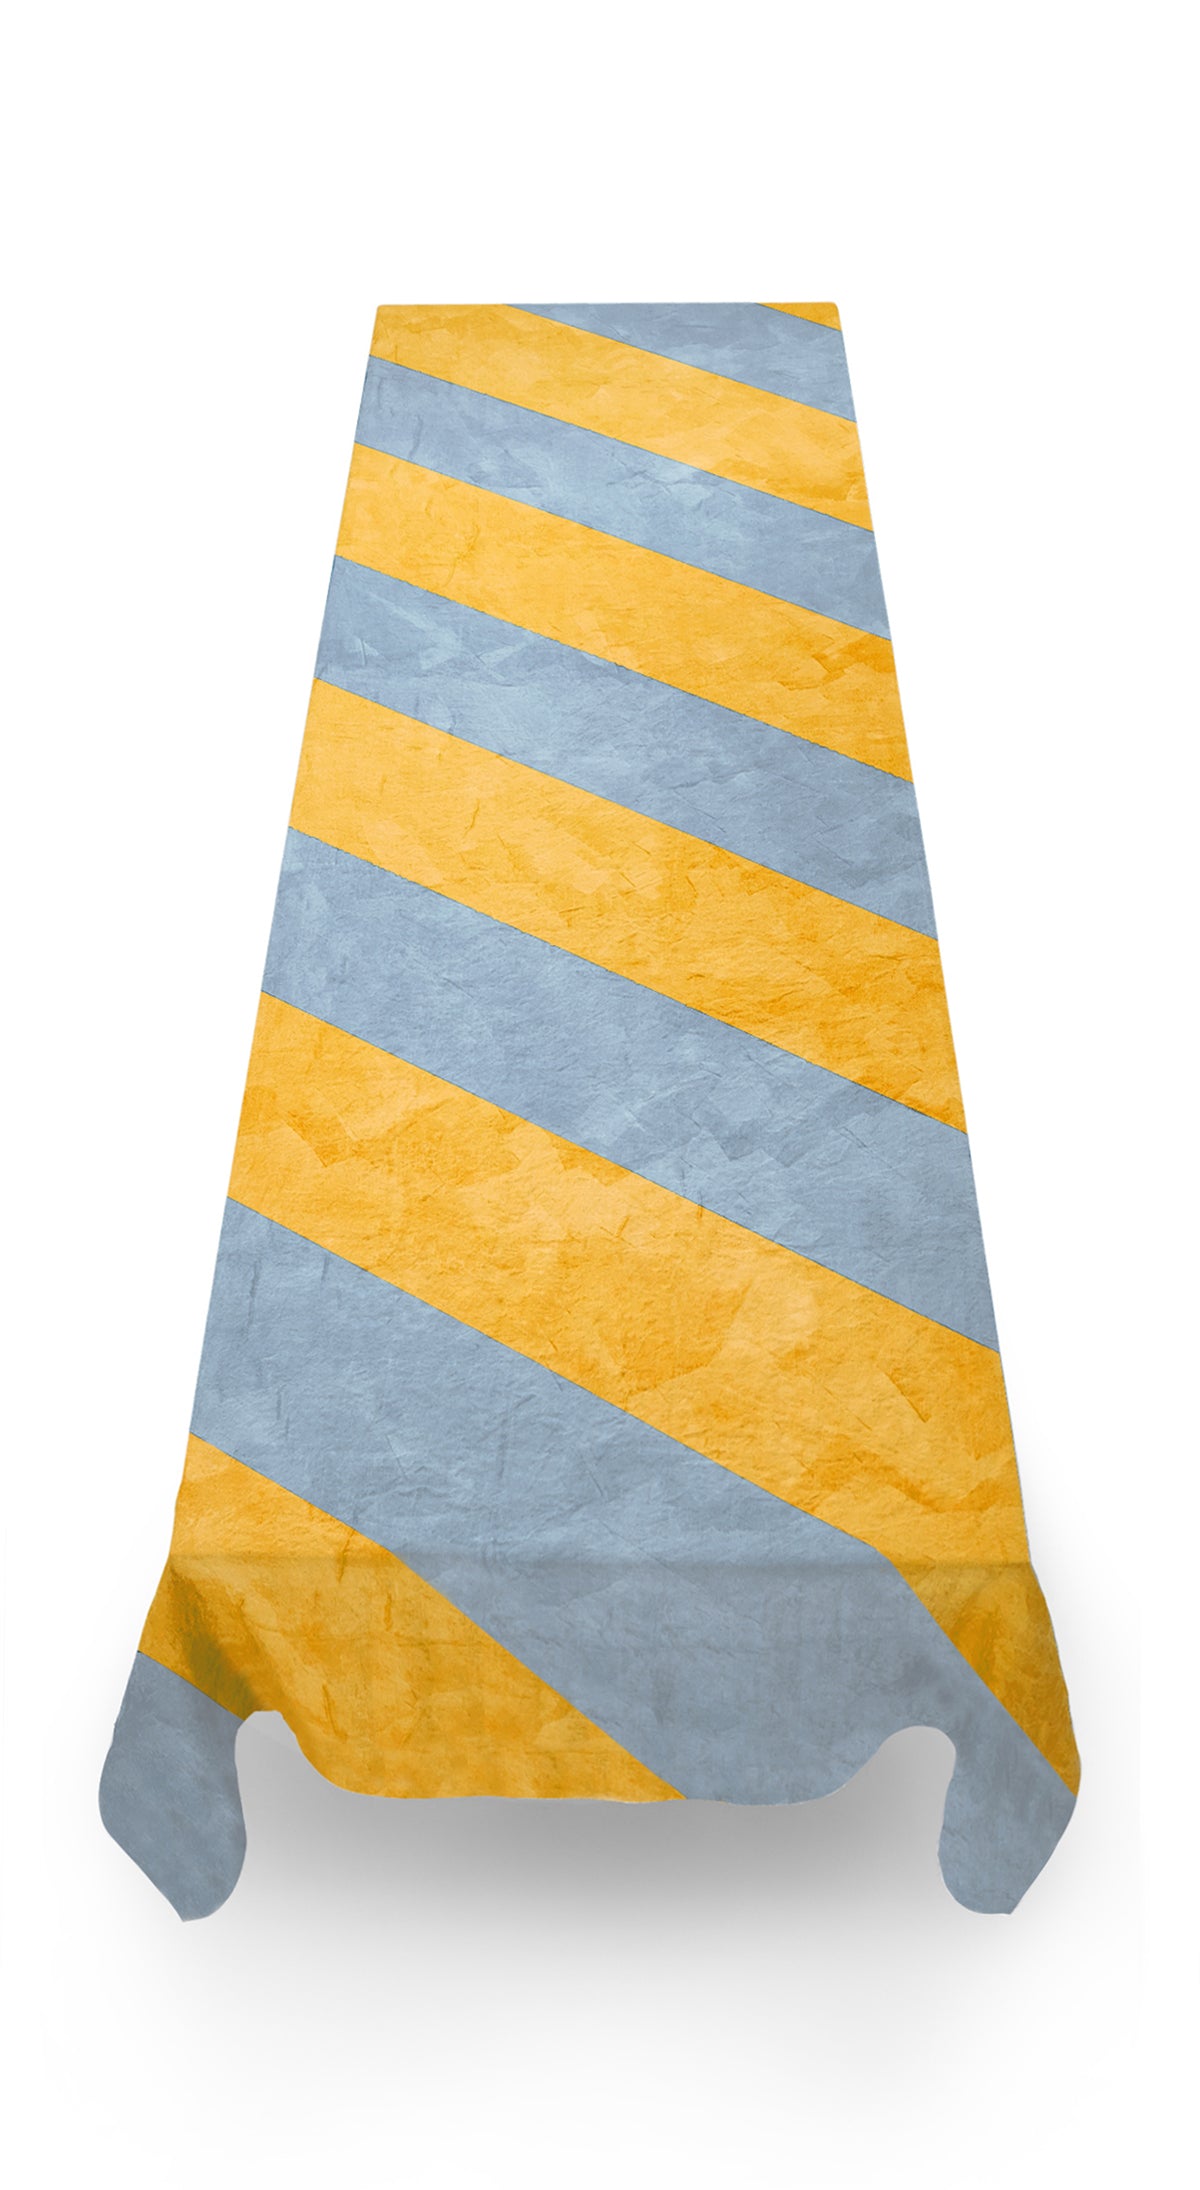 Stripe Linen Tablecloth in Mustard Yellow and Pale Blue